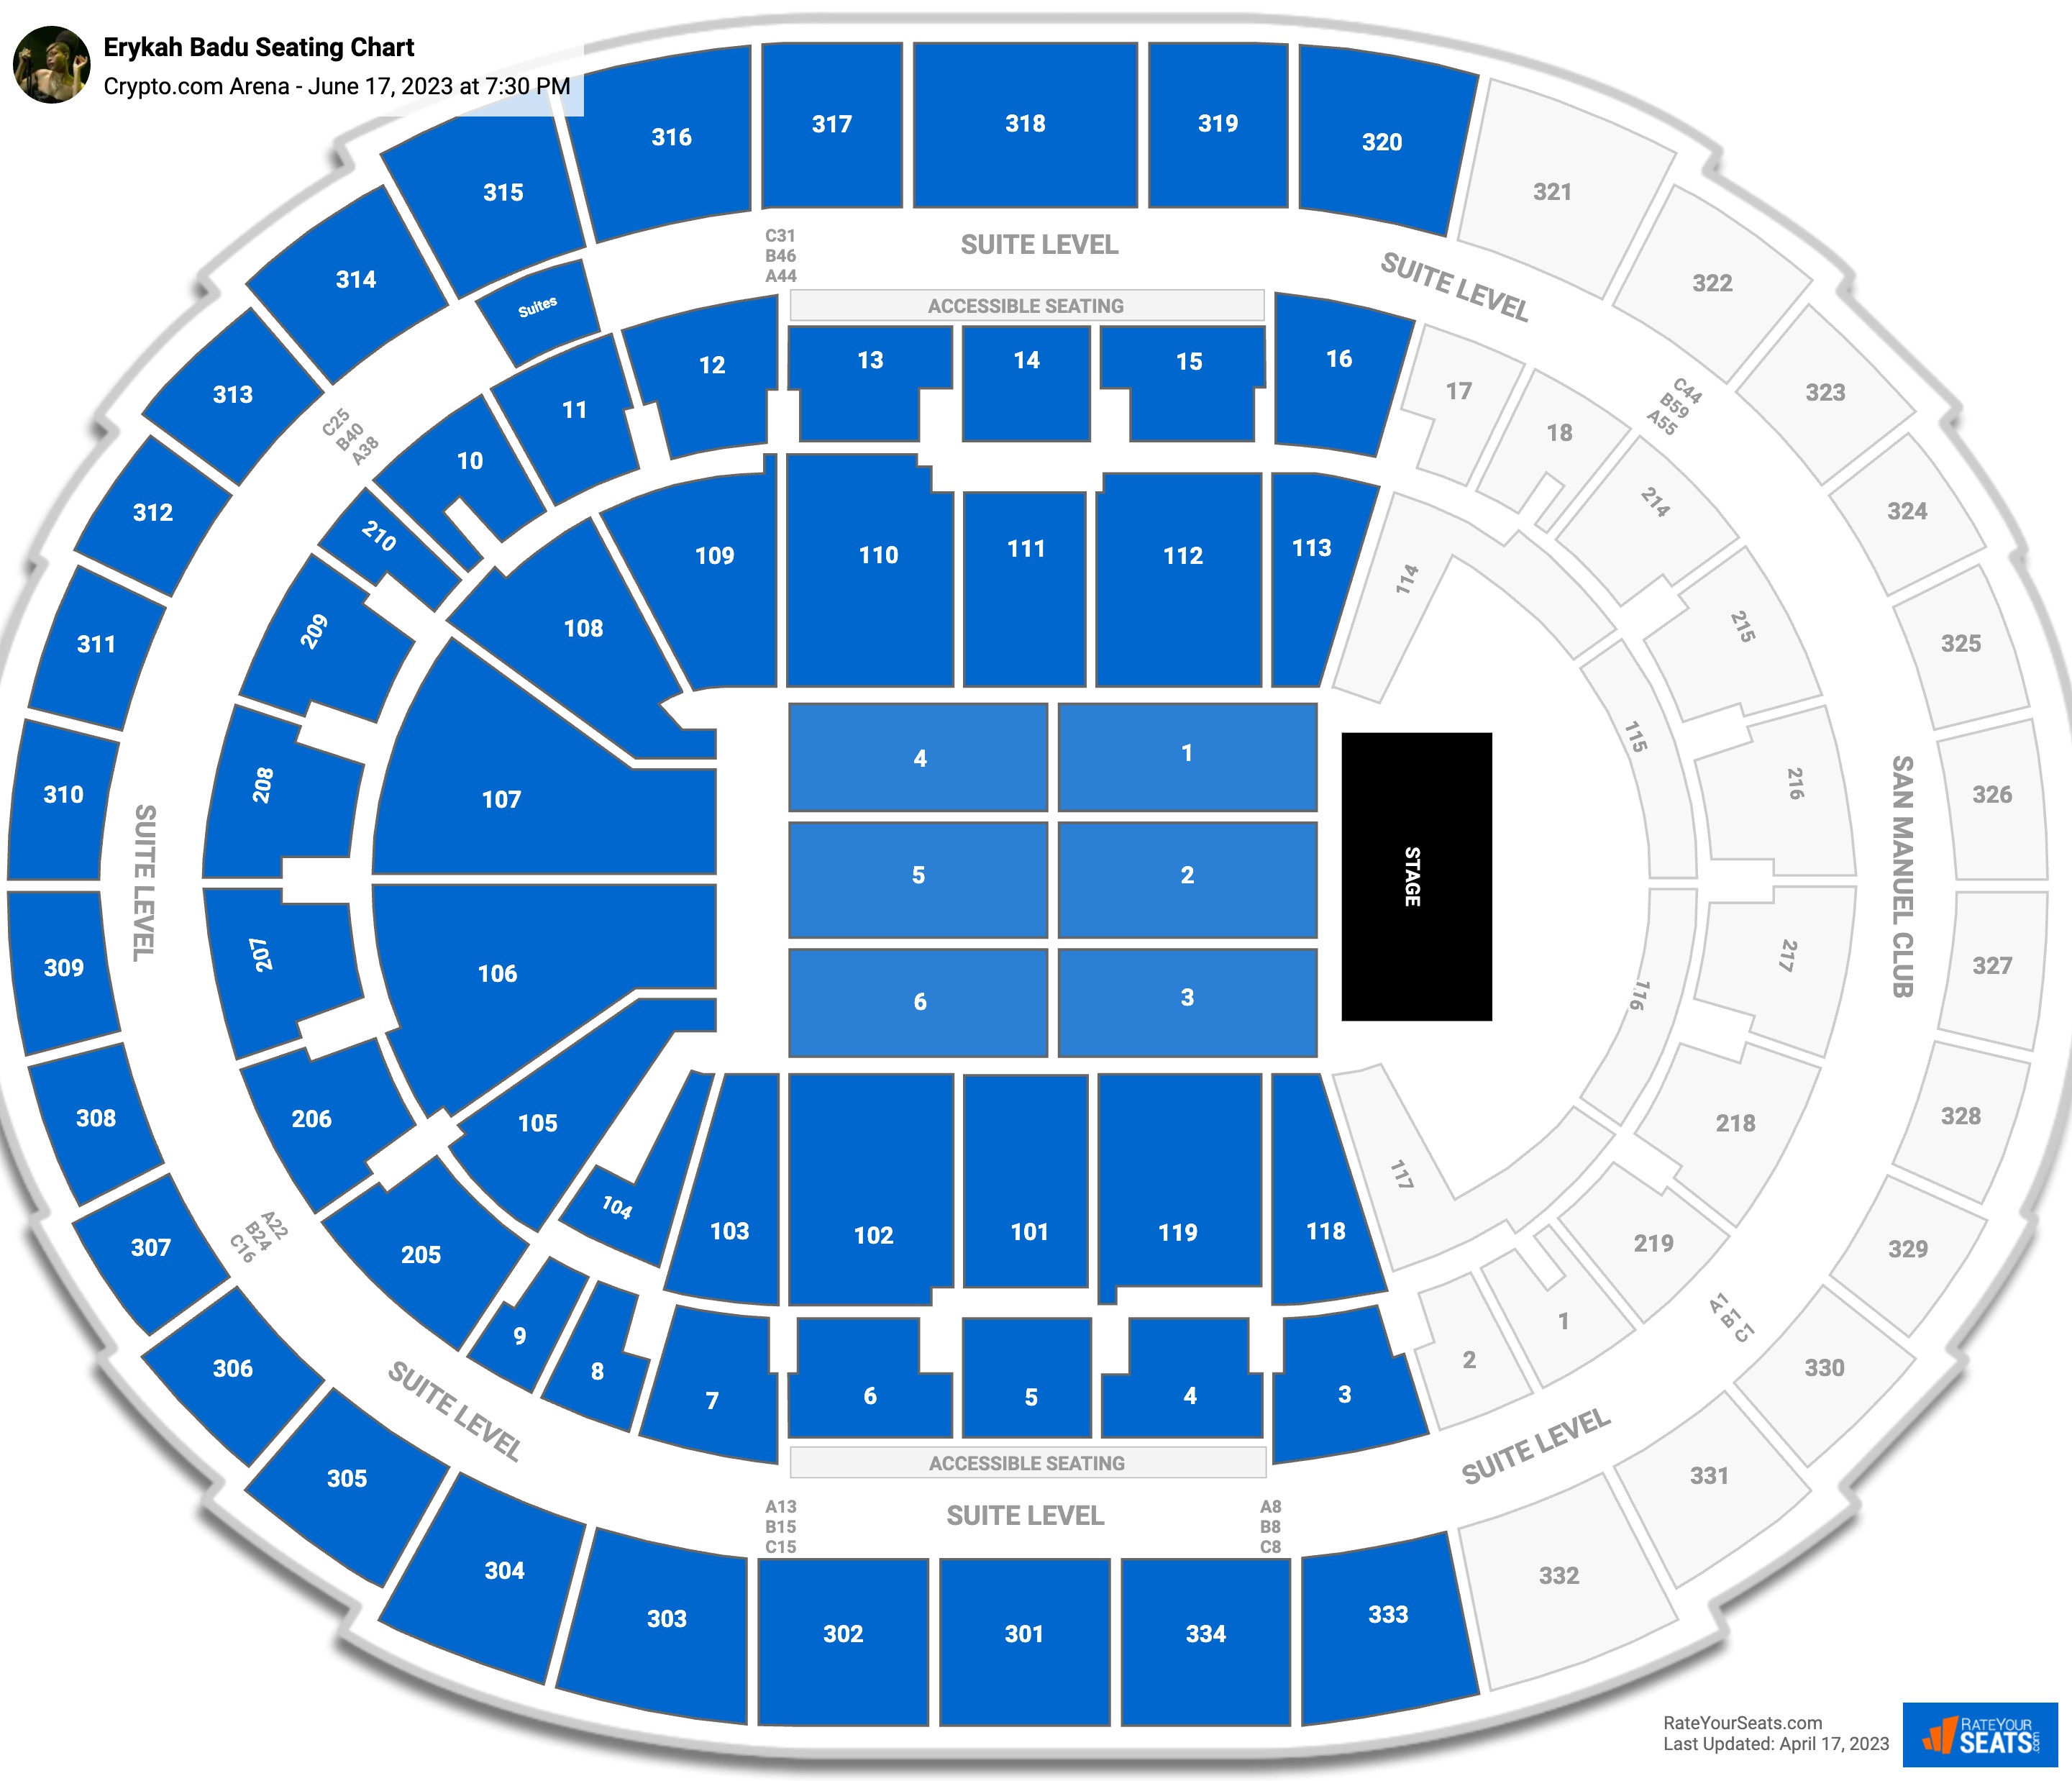 crypto.com arena seating chart with seat numbers